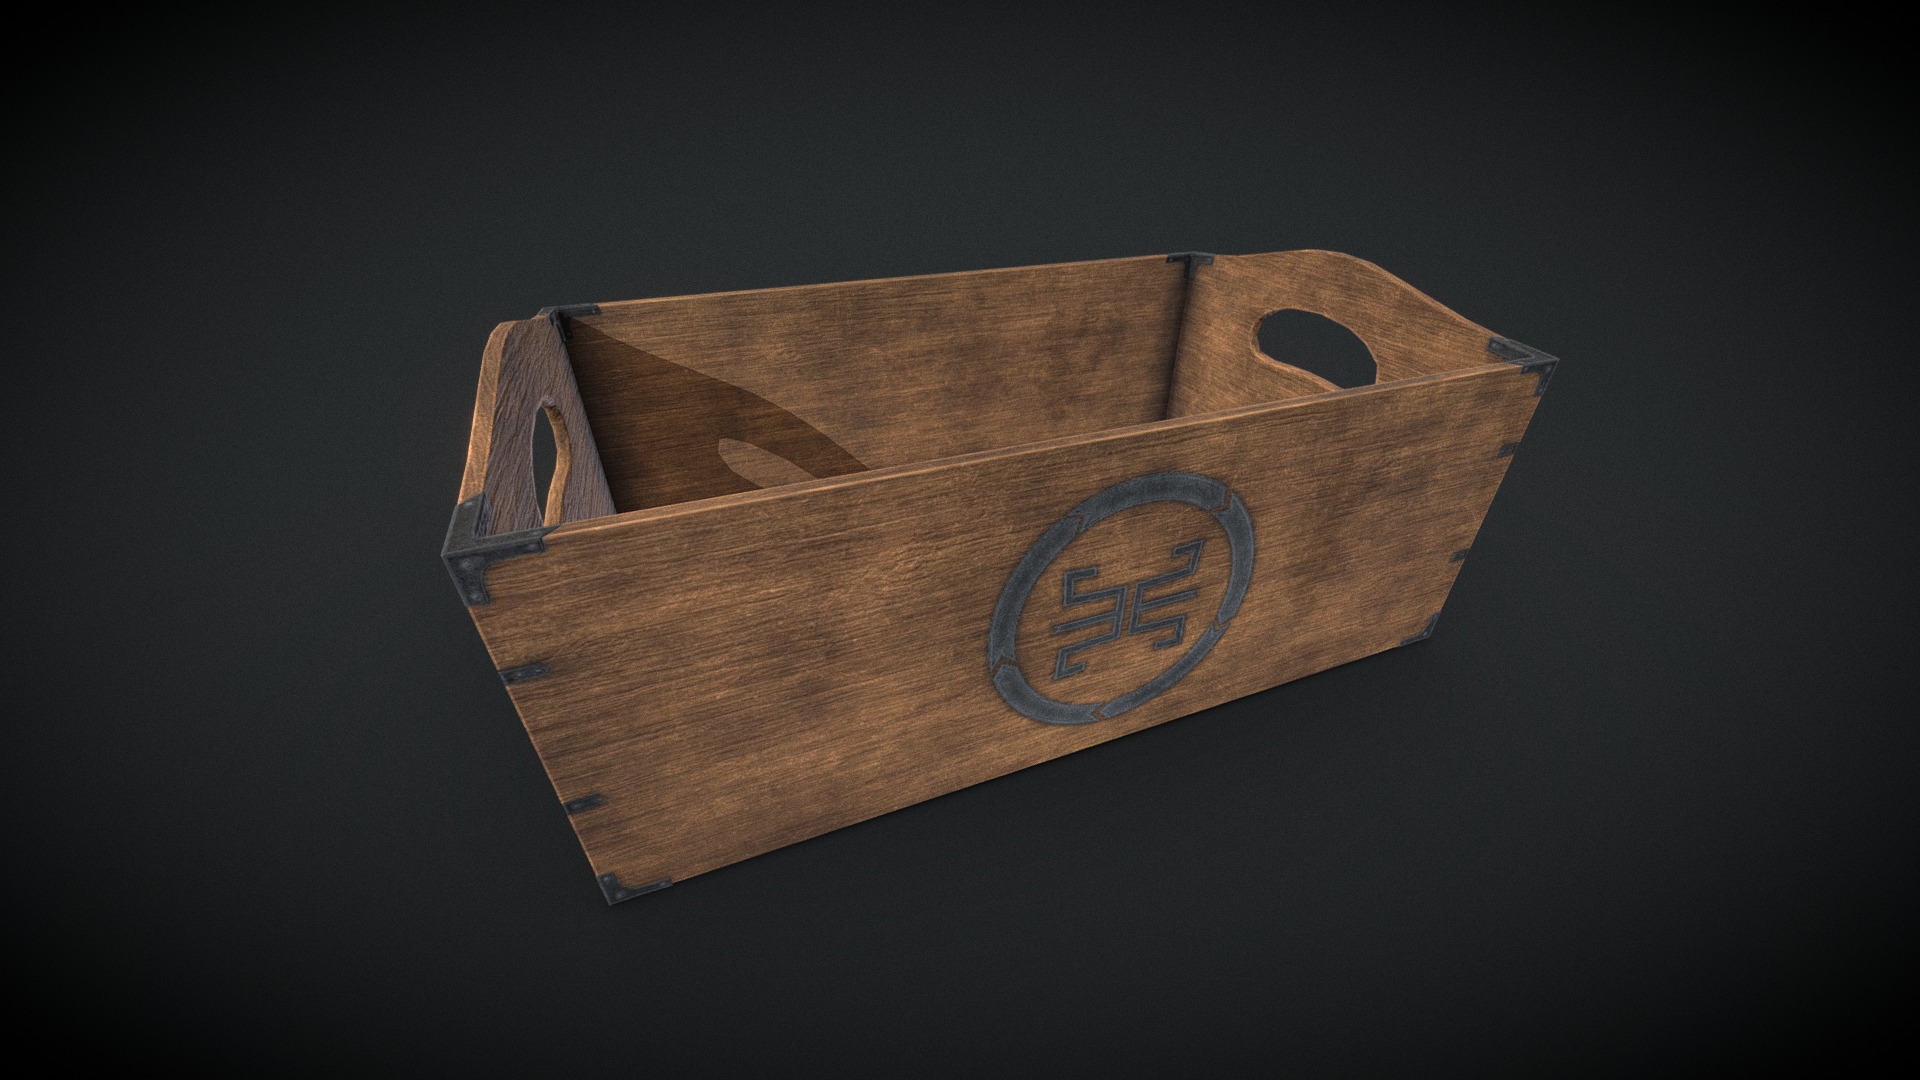 3D model Wooden Crate - This is a 3D model of the Wooden Crate. The 3D model is about a wood box with a logo on it.